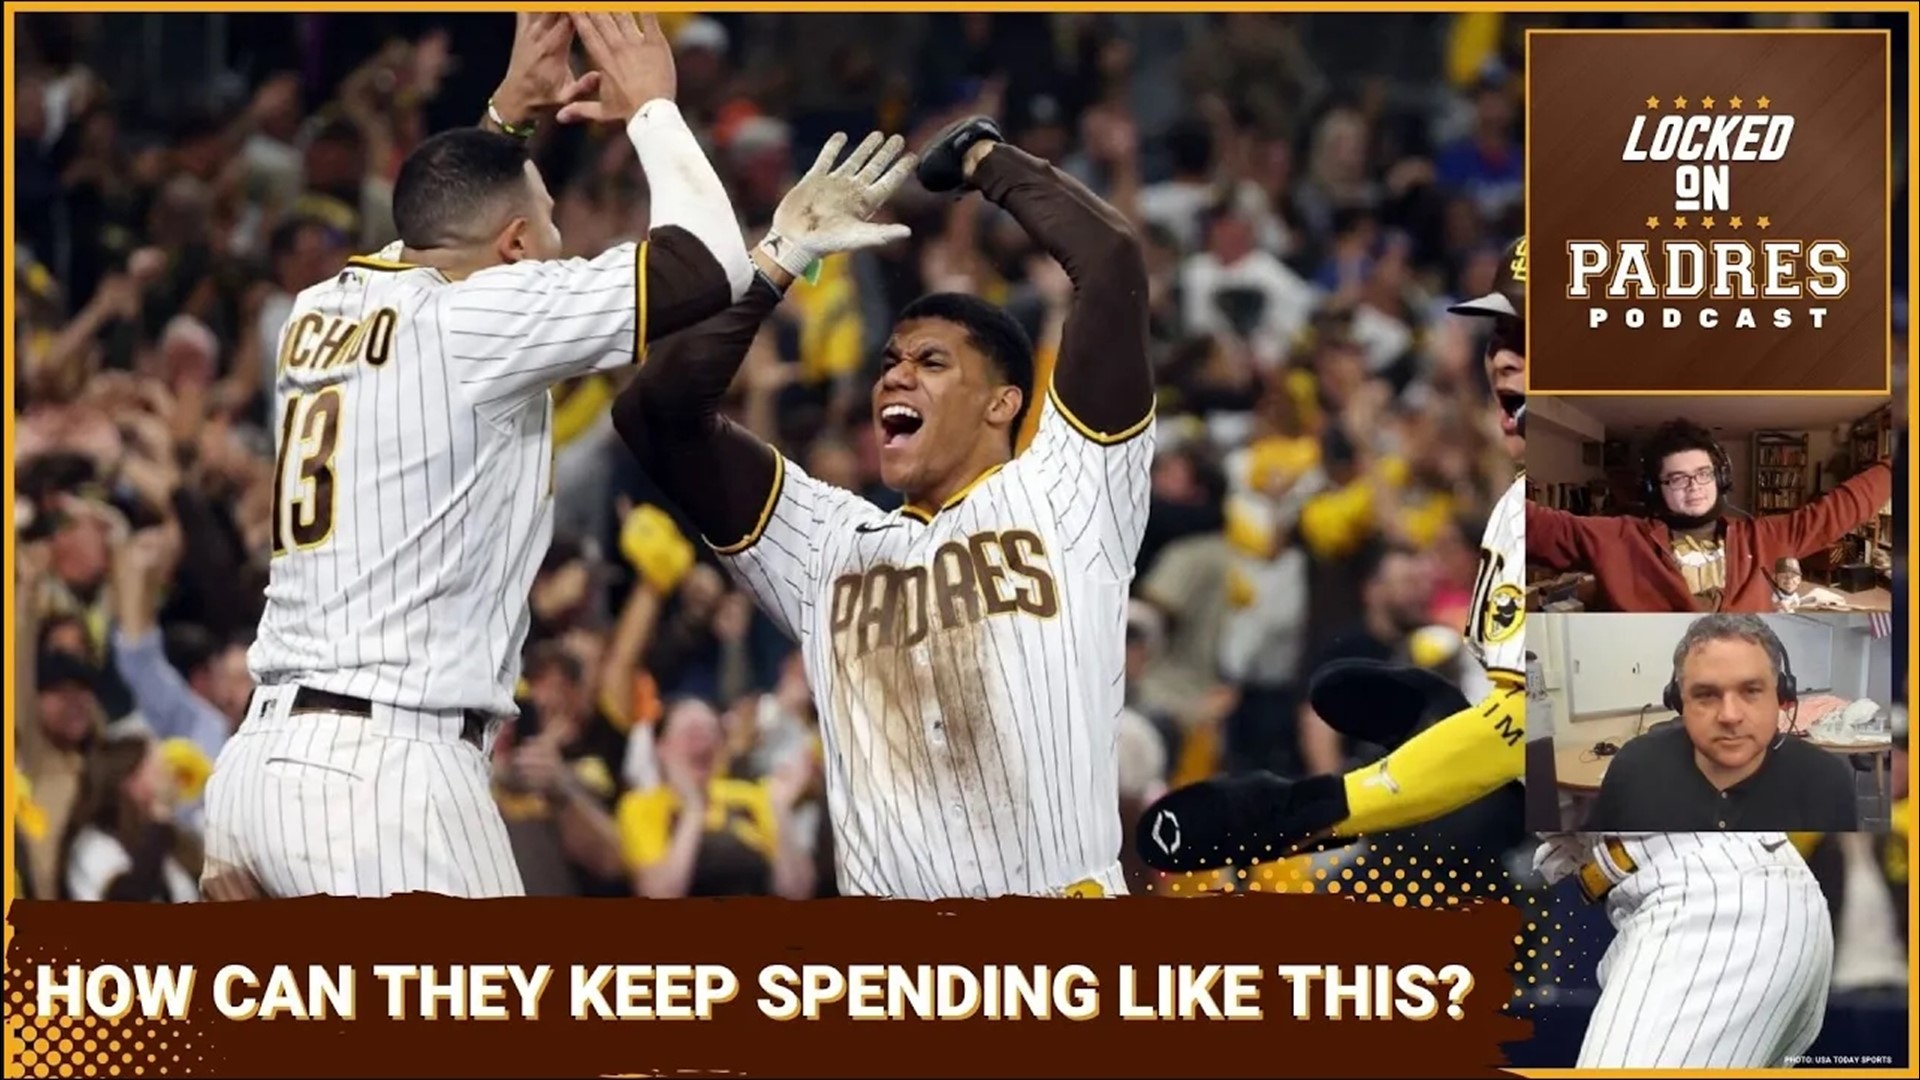 Javier discusses all the hoopla and nonsense surrounding the Padres spending a whole metric ton of money!